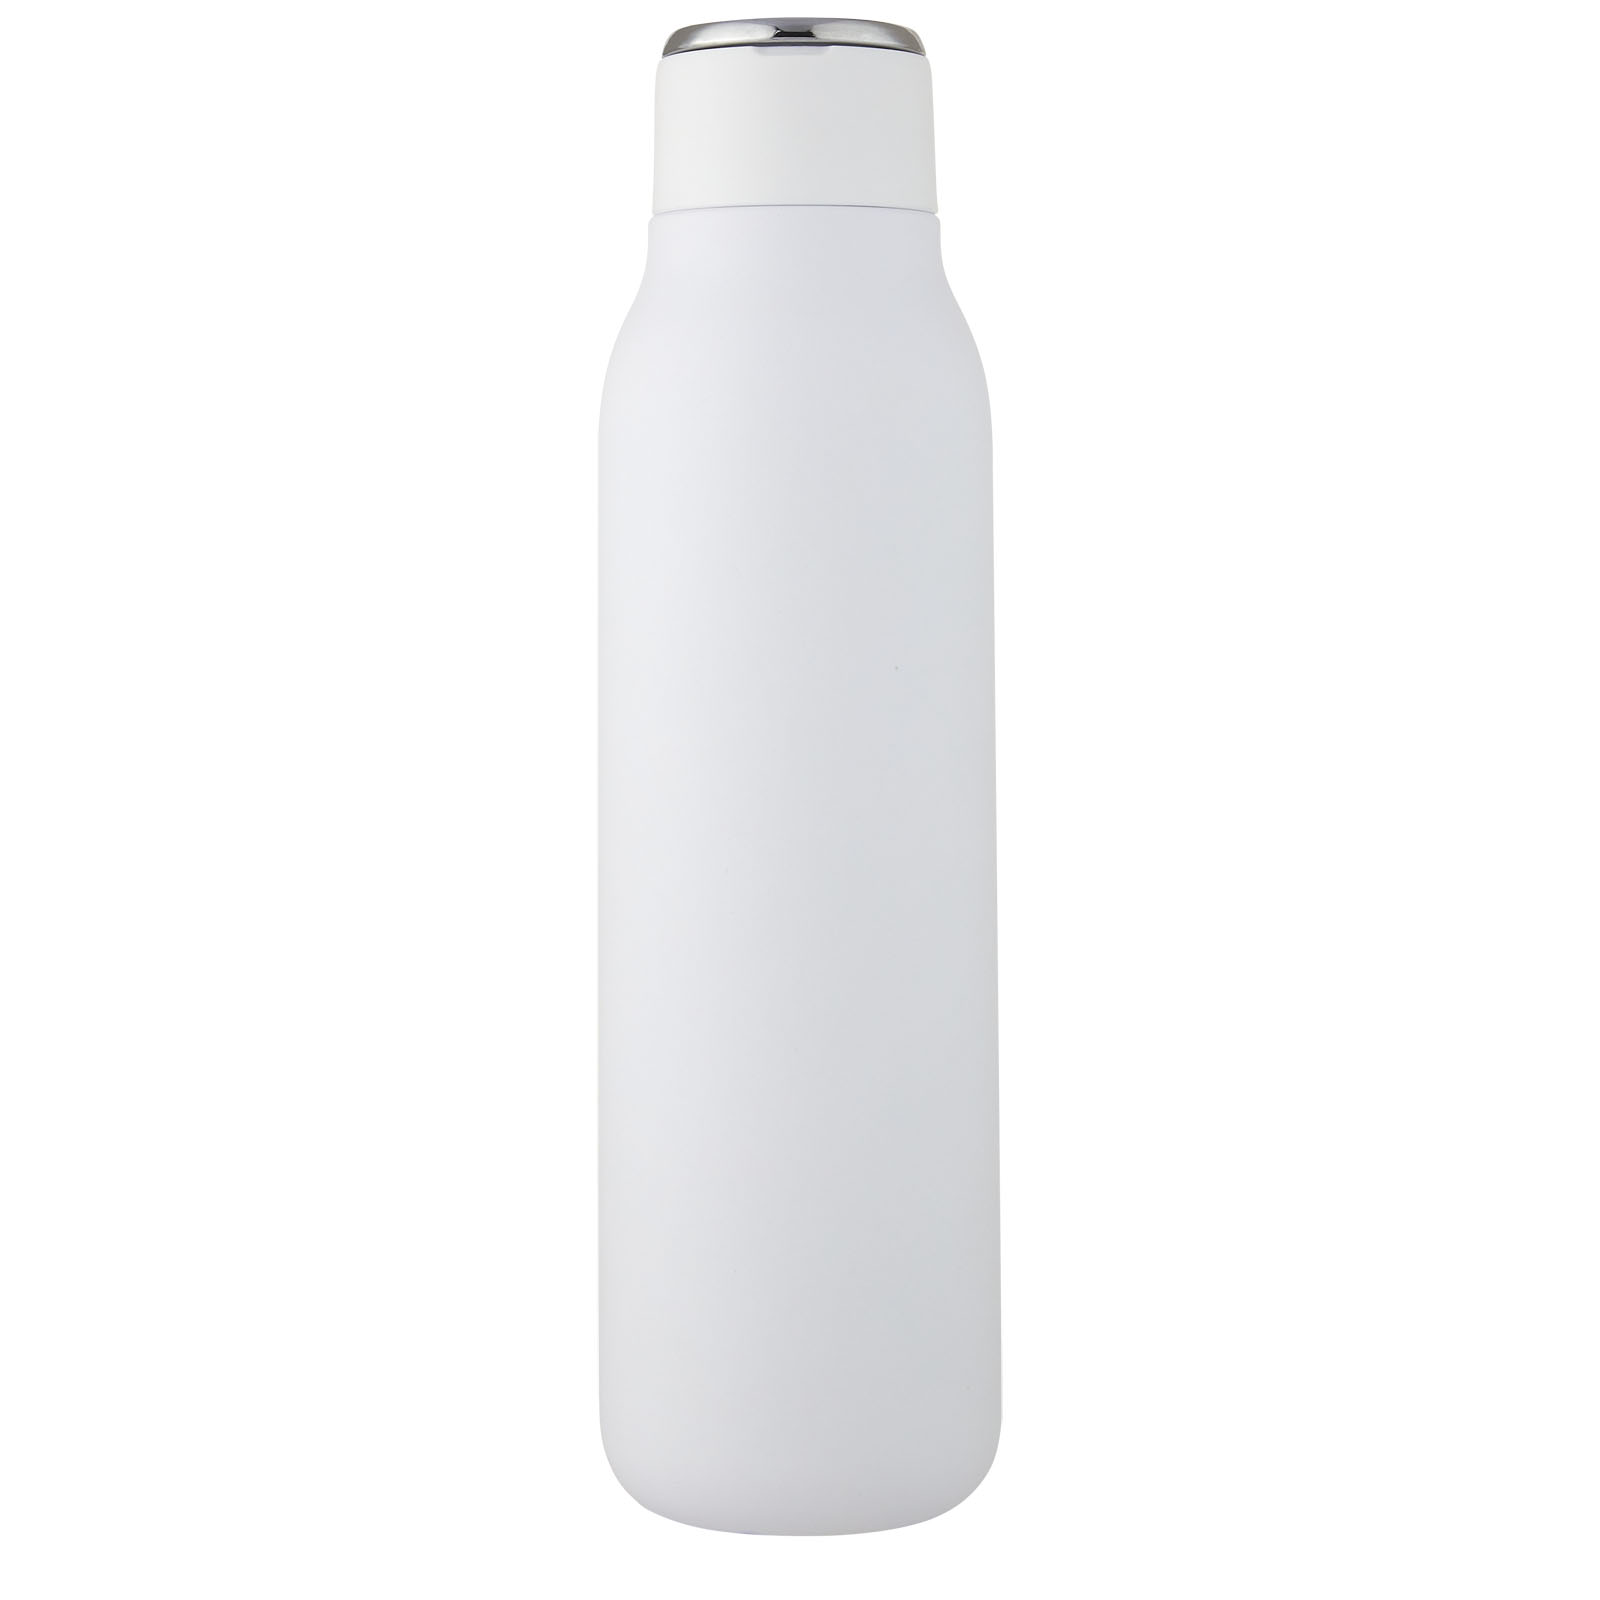 Advertising Insulated bottles - Marka 600 ml copper vacuum insulated bottle with metal loop - 2